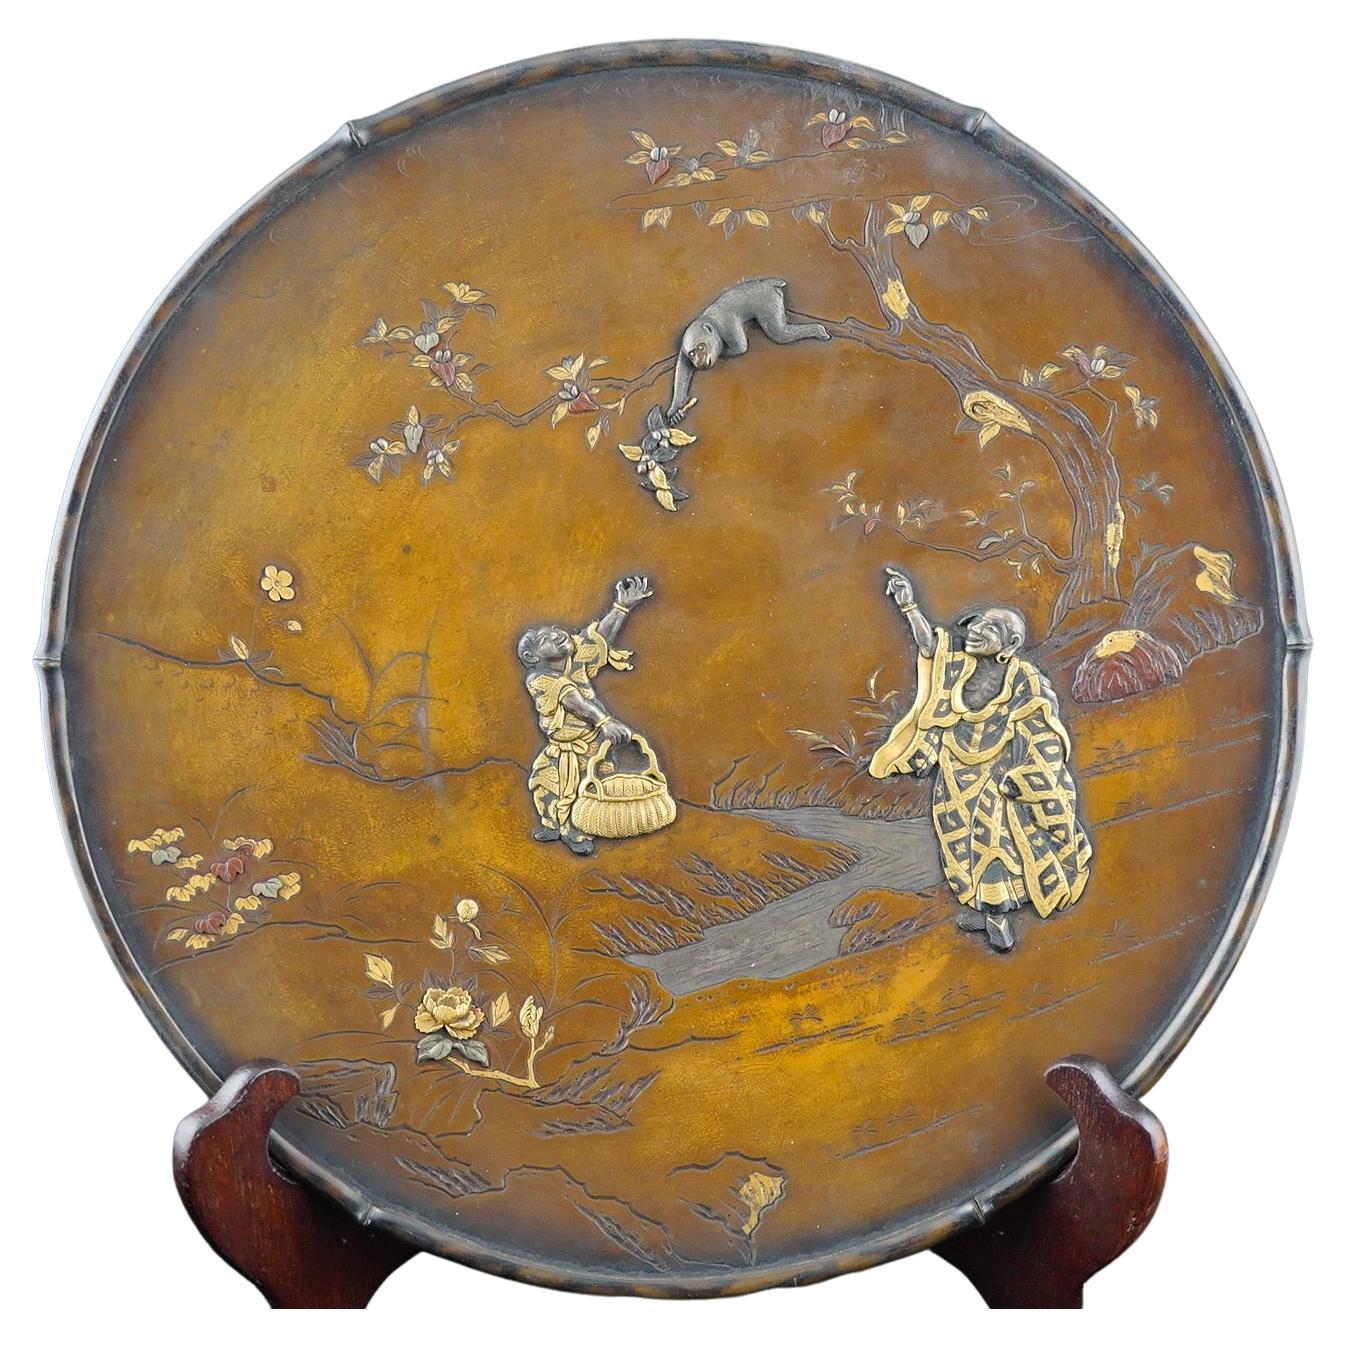 Japanese Mixed Metal Finely Executed Decorative Plate of Monkey Picking Fruit